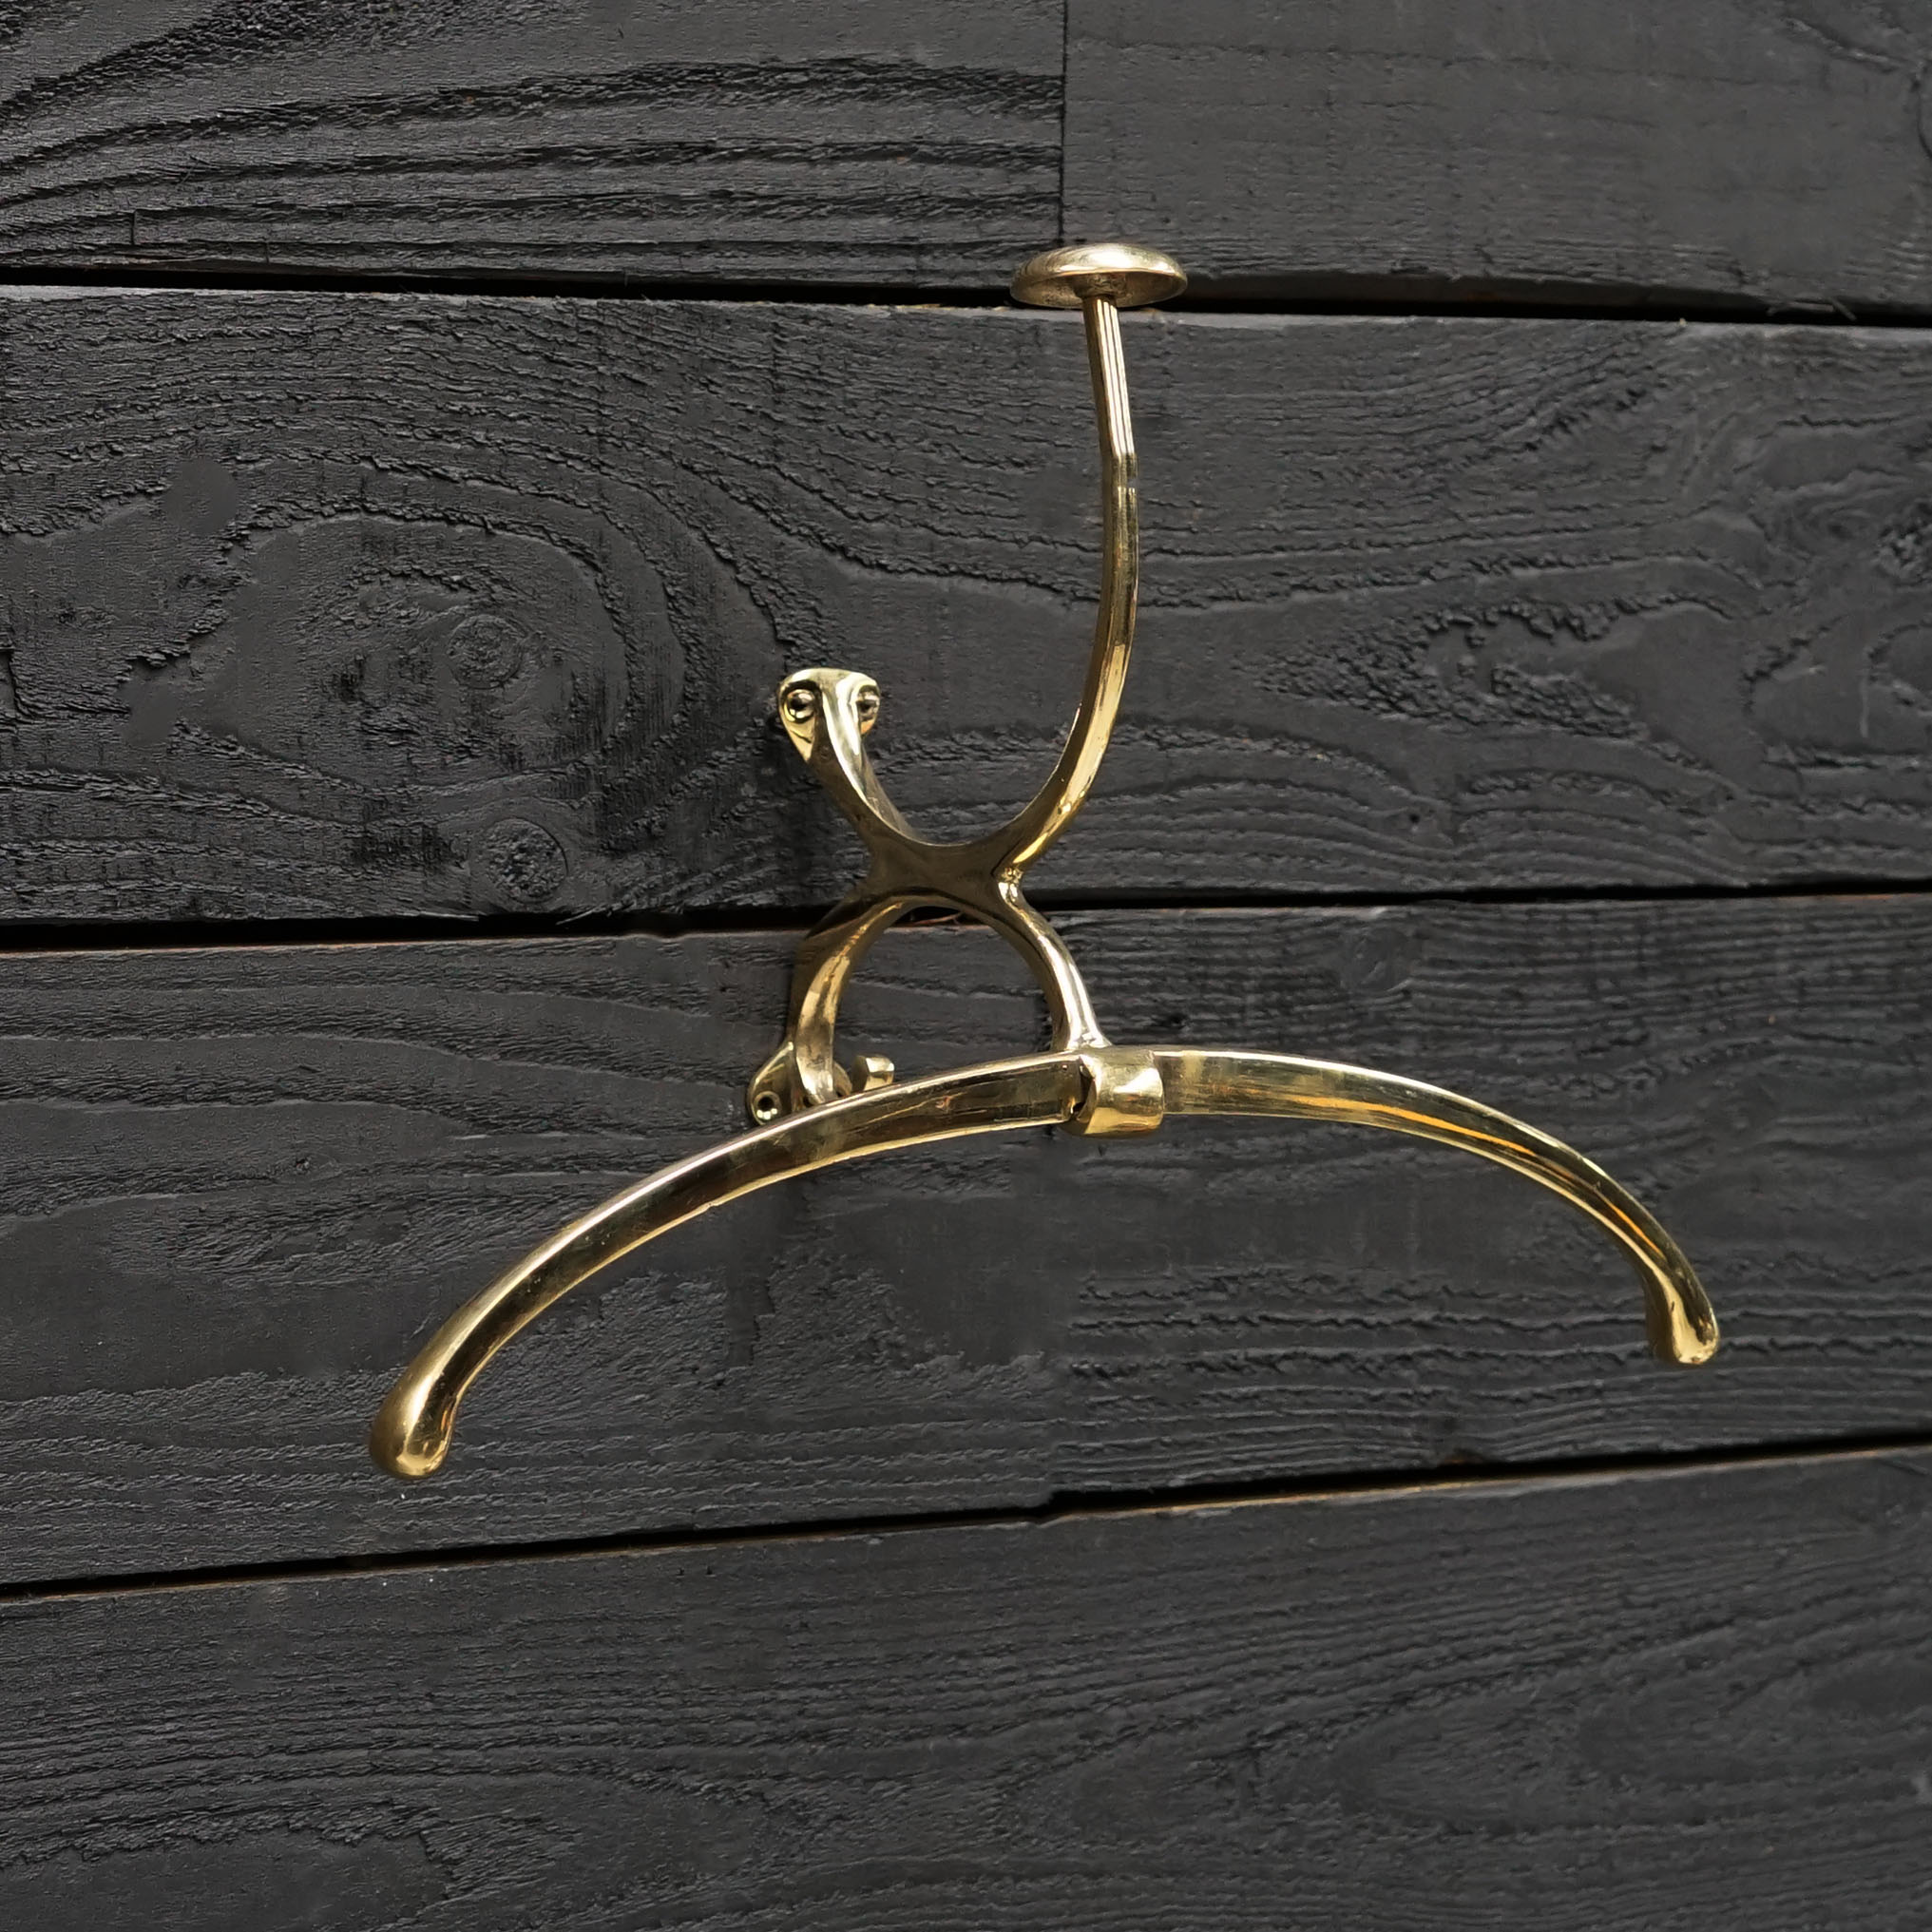 Vintage French Brass Coat and Hat Hanger – Wall Mounted – Trinity Marine